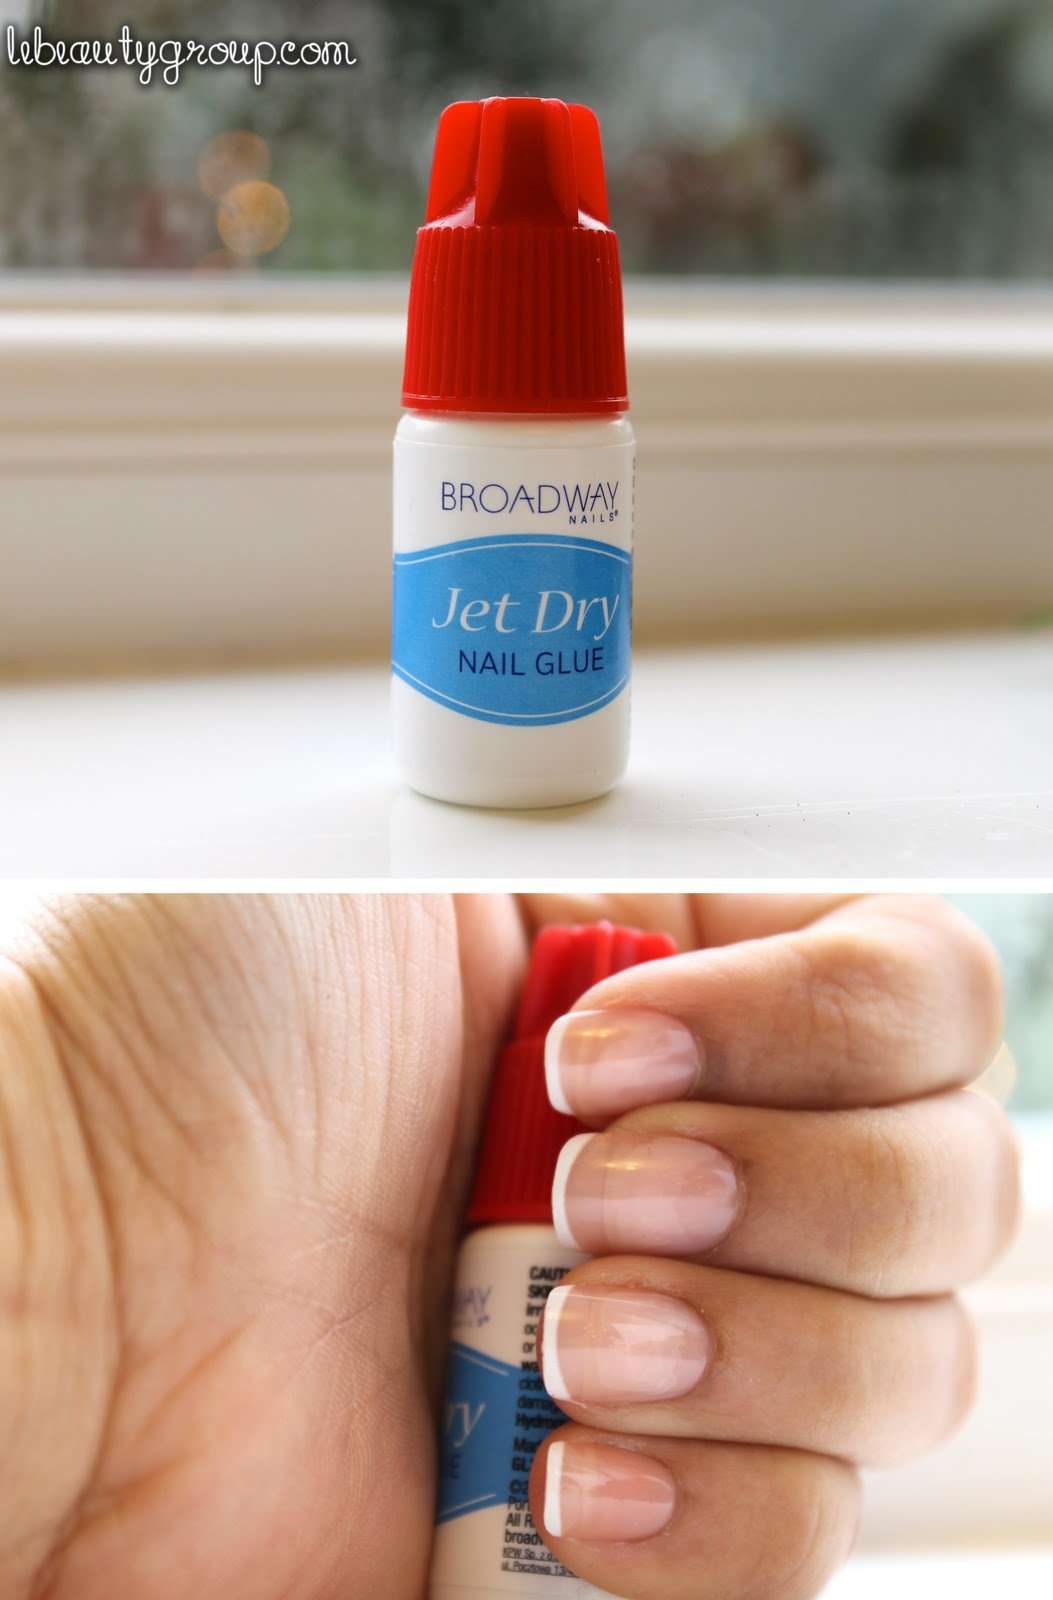 Best Nail Glue: Broadway Nails Jet Dry Nail Glue (Review)